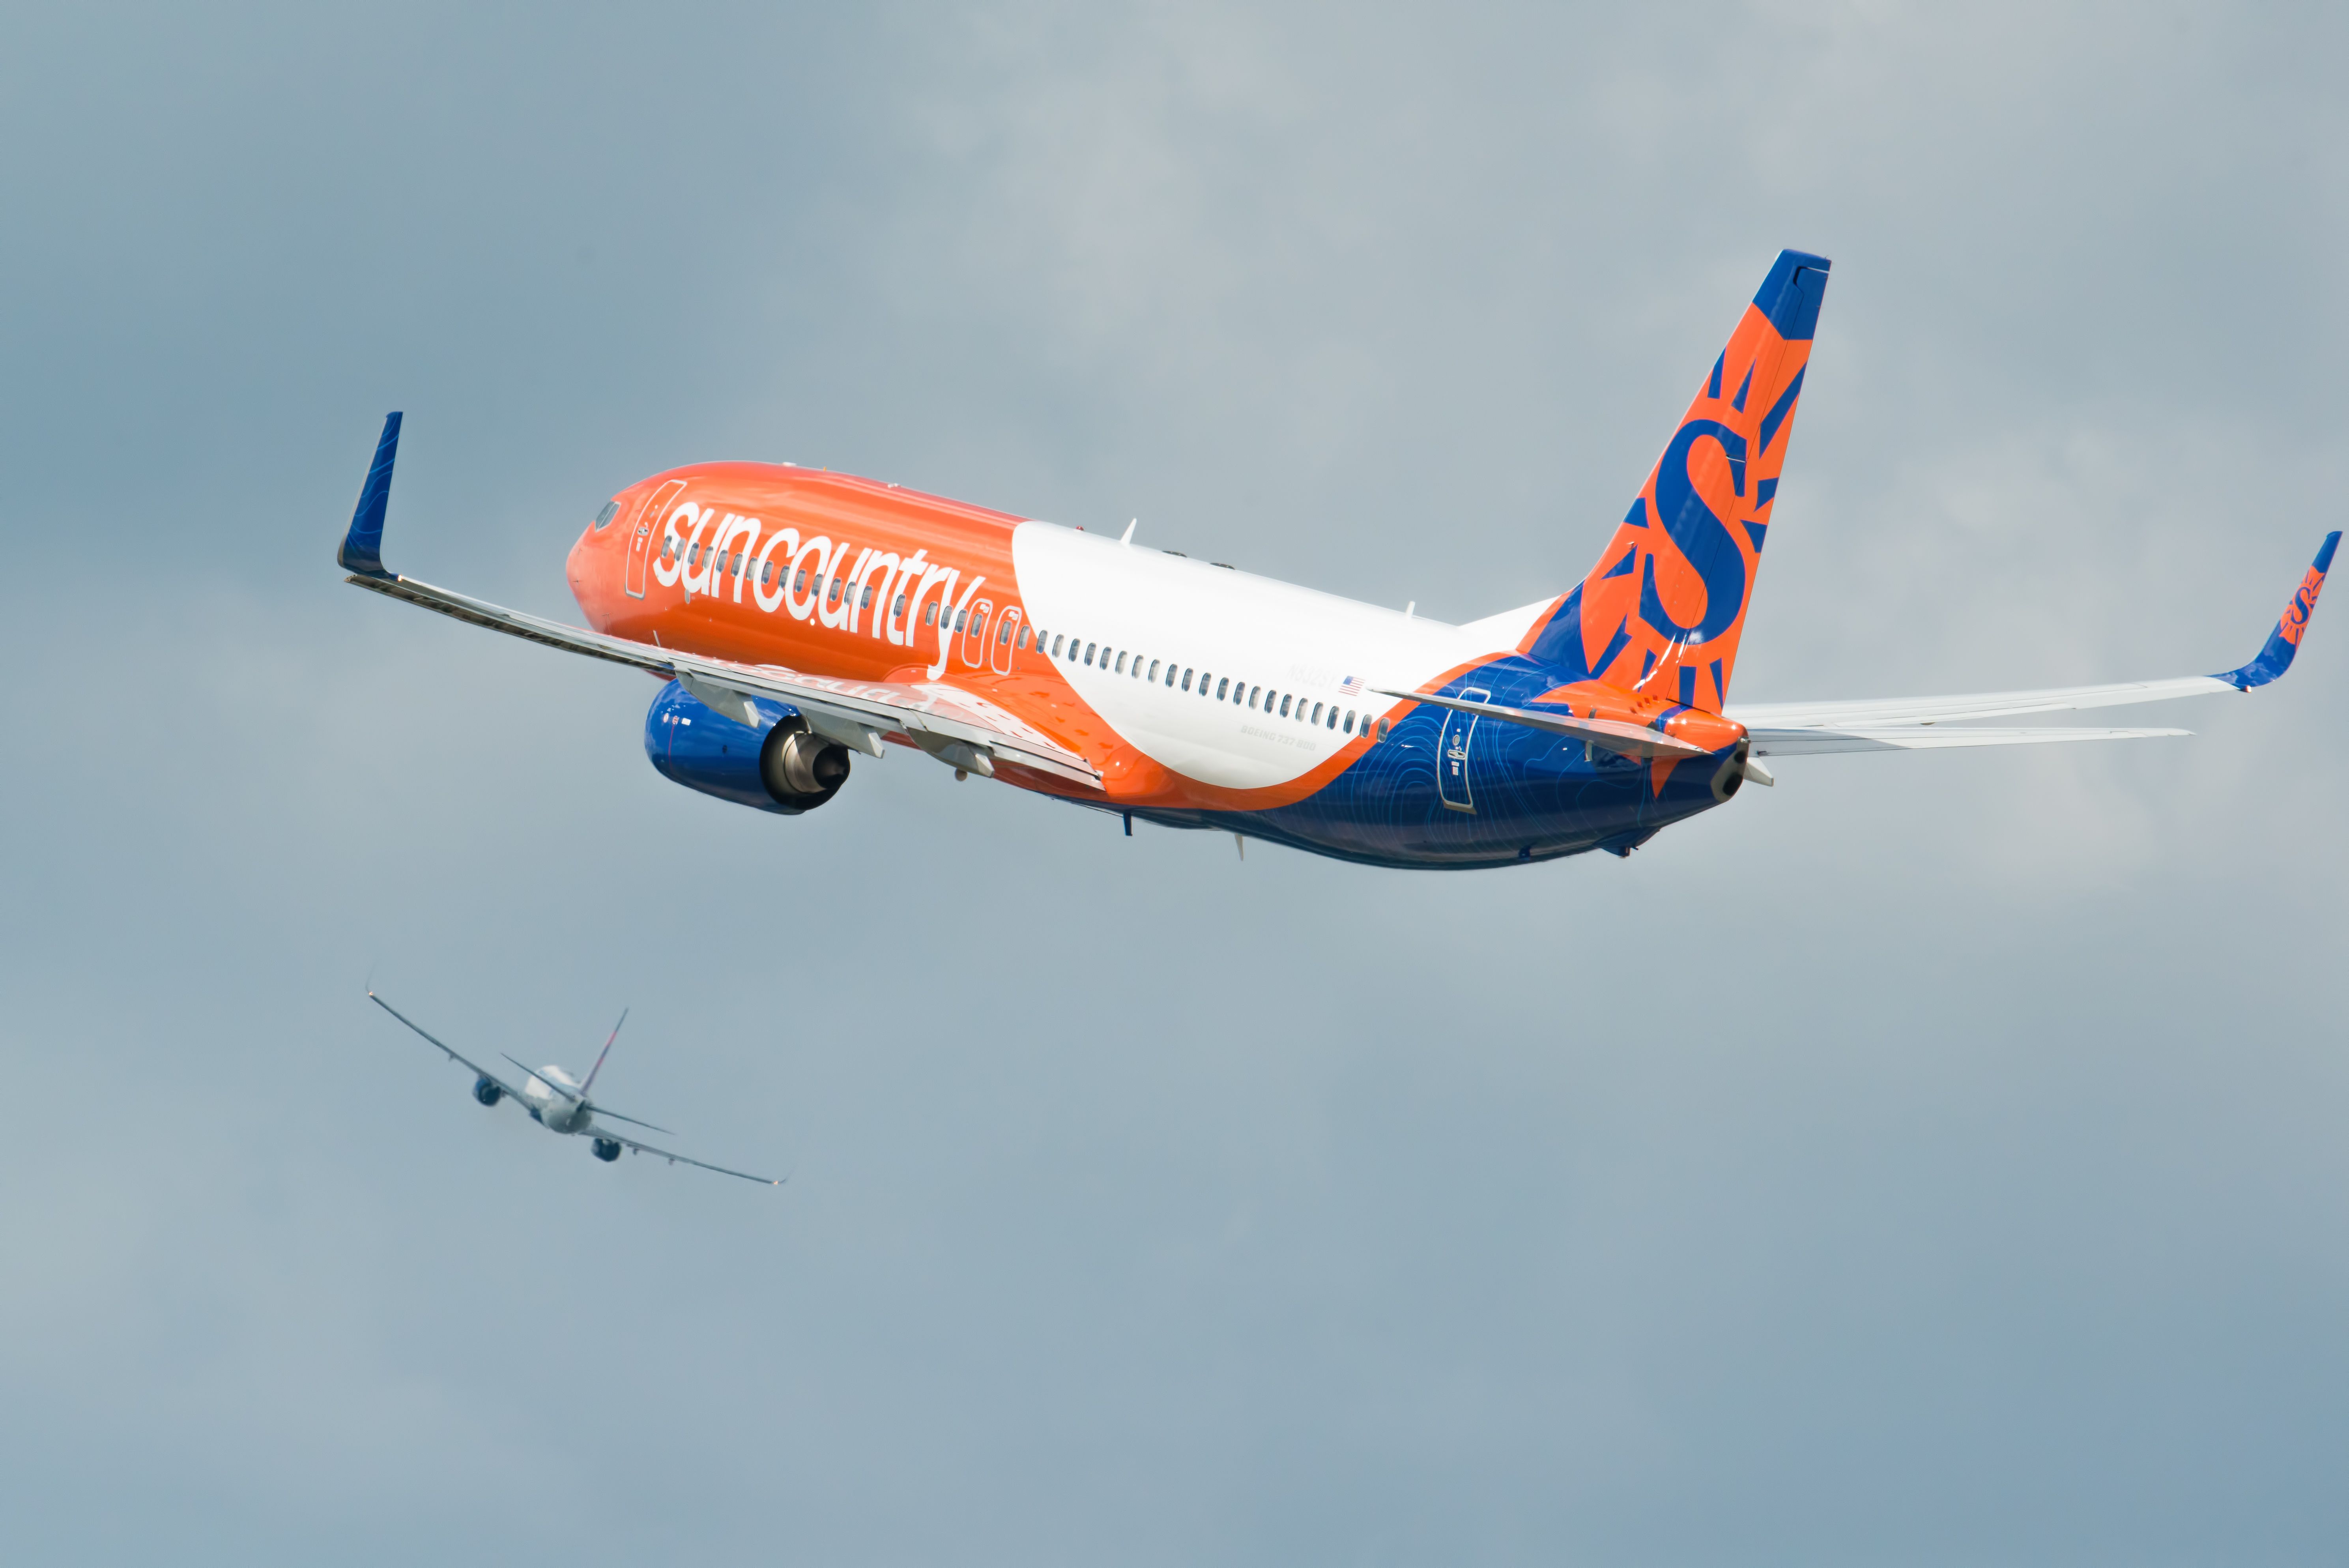 A Sun Country Airlines aircraft flying just just behind another aircraft in the distance.